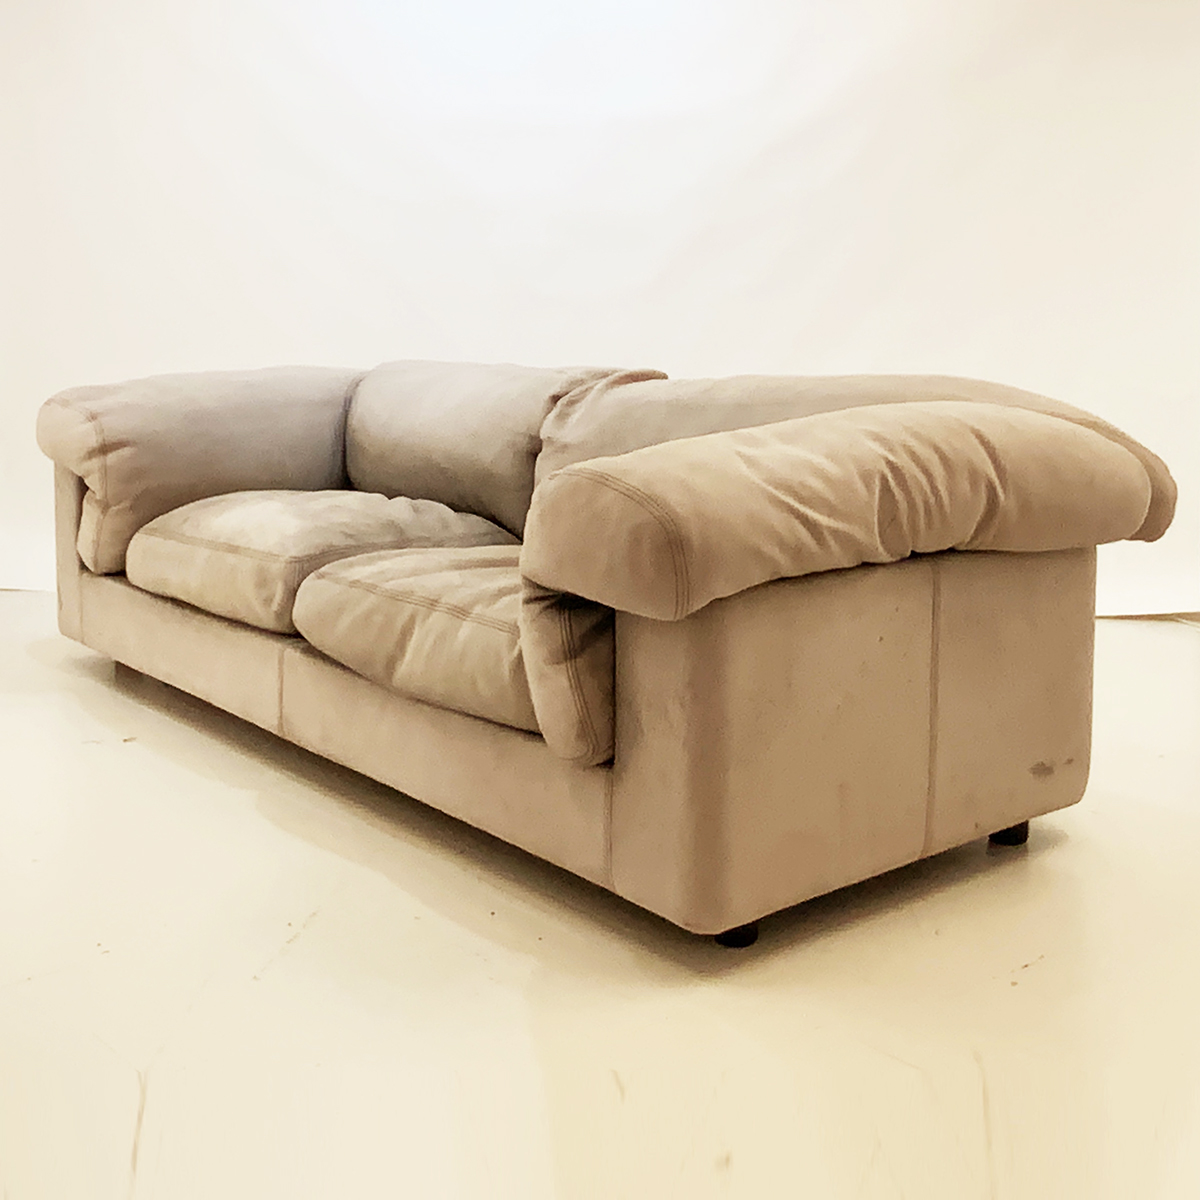 Darby Sofa From Design Warehouse